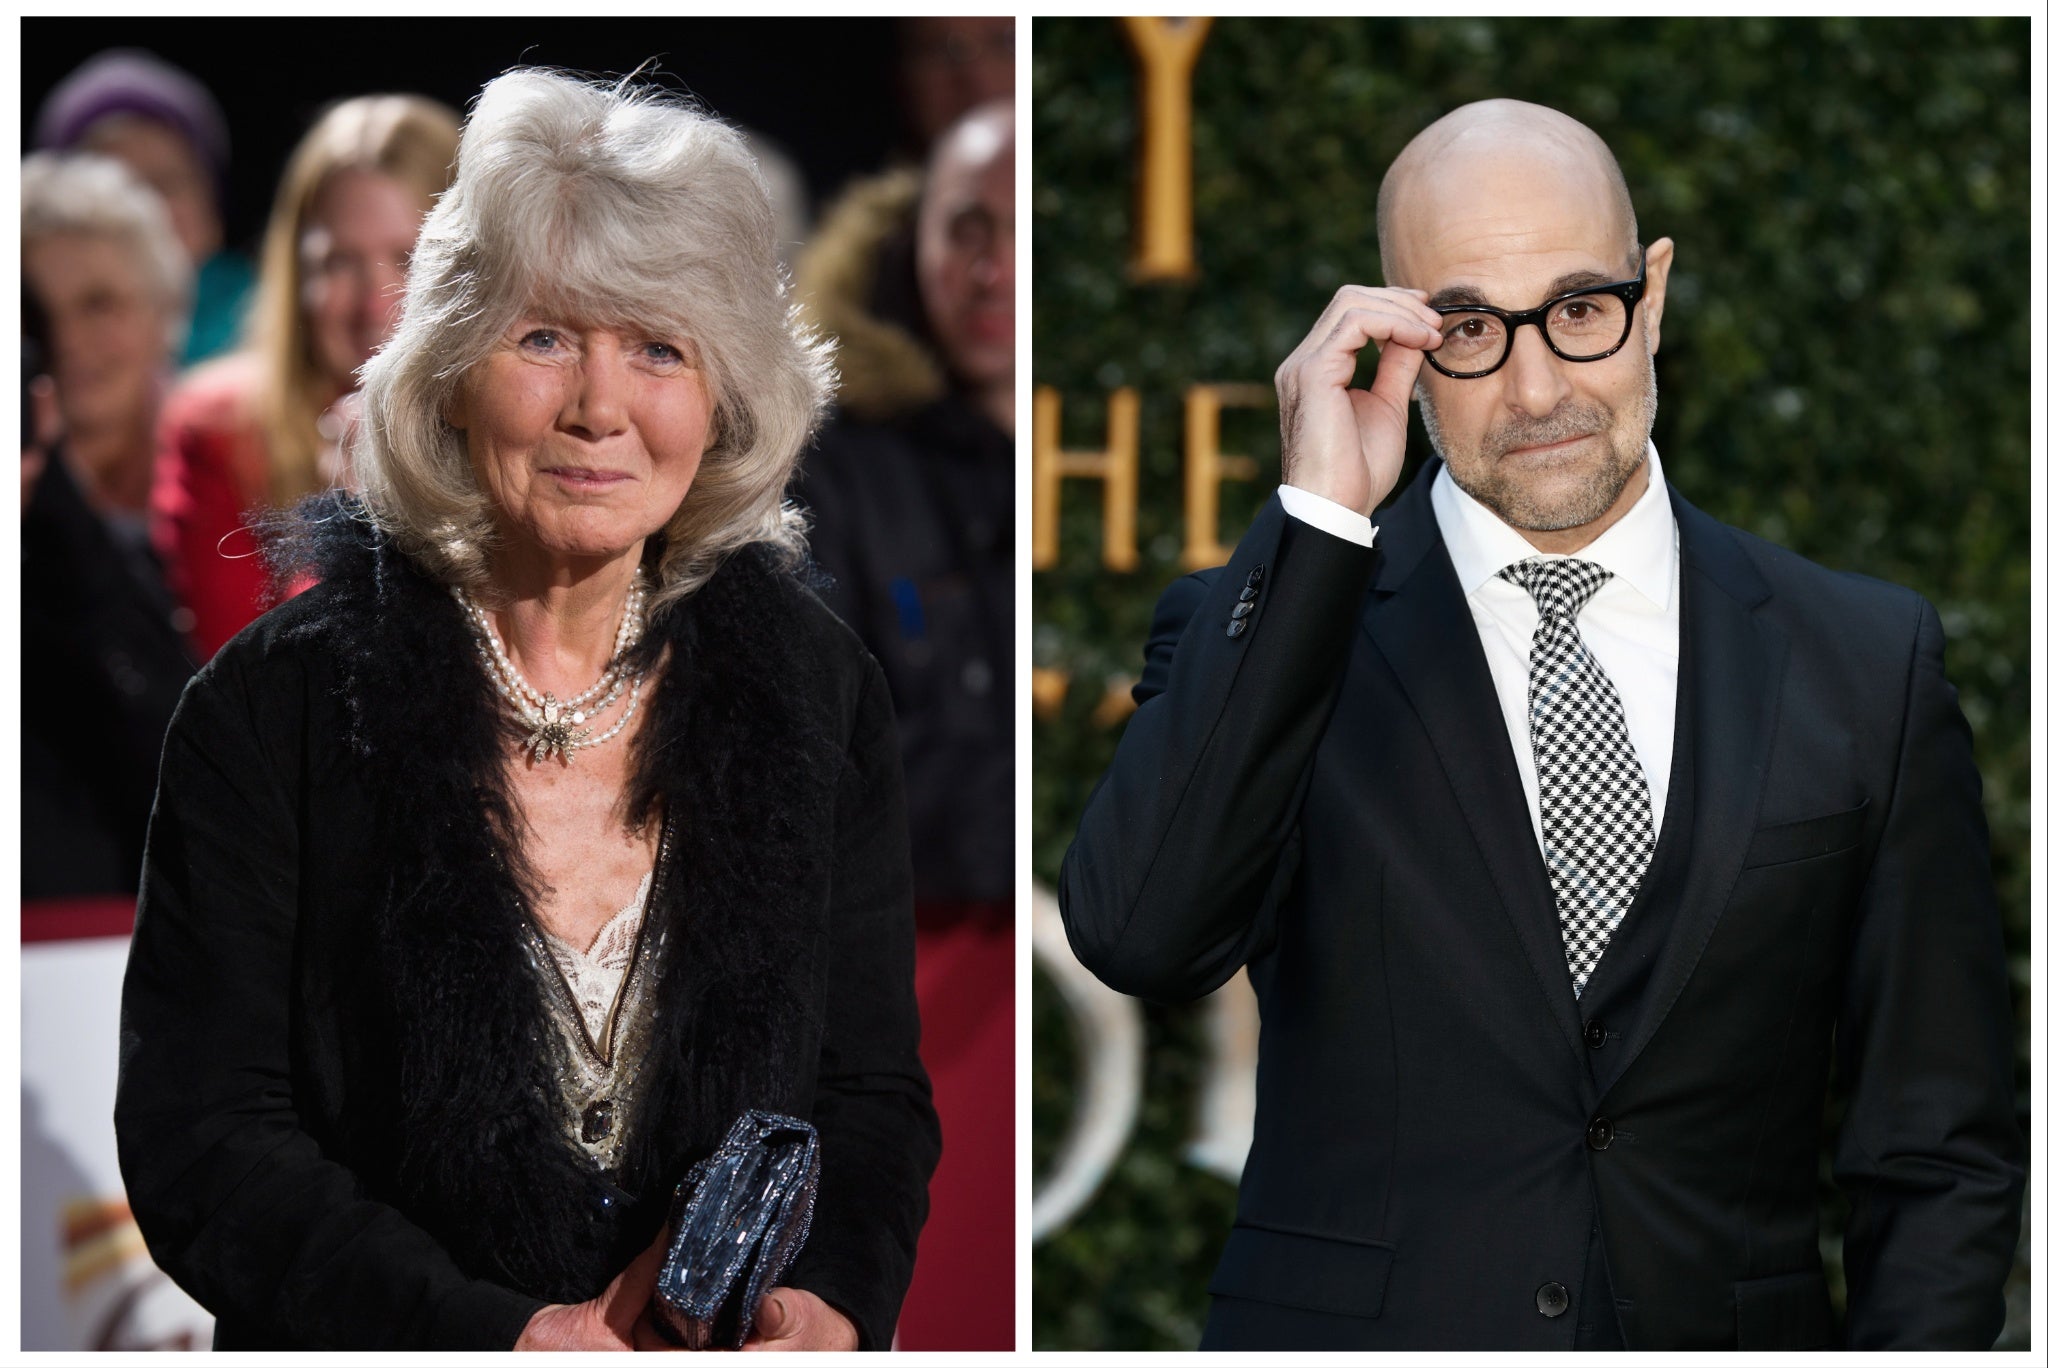 Jilly Cooper doesn’t understand the fuss over ‘adorable’ Stanley Tucci